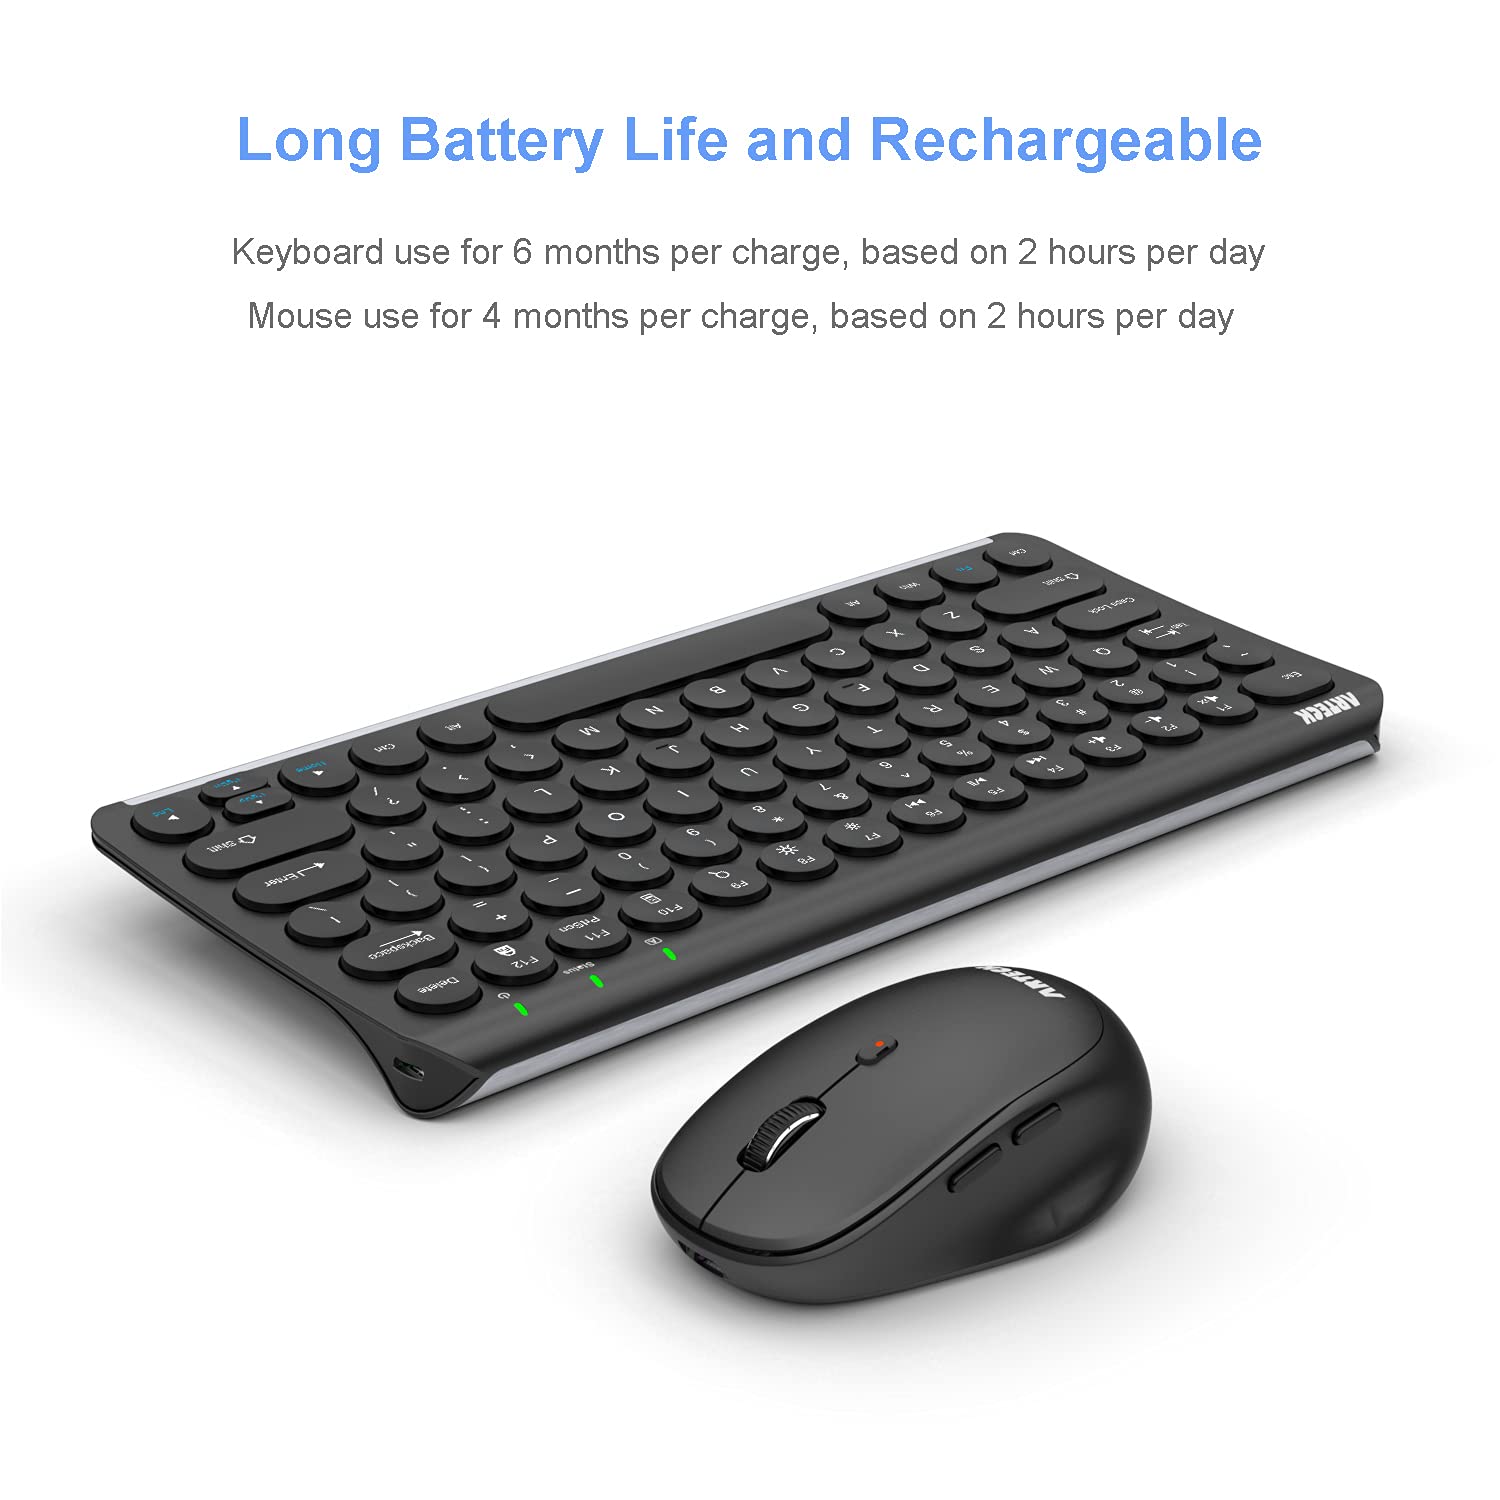 Arteck 2.4G Wireless Keyboard and Mouse Combo Ultra Compact Slim Stainless Full Size Keyboard and Ergonomic Mouse for Computer/Desktop/PC/Laptop and Windows 10/8/7 Build in Rechargeable Battery